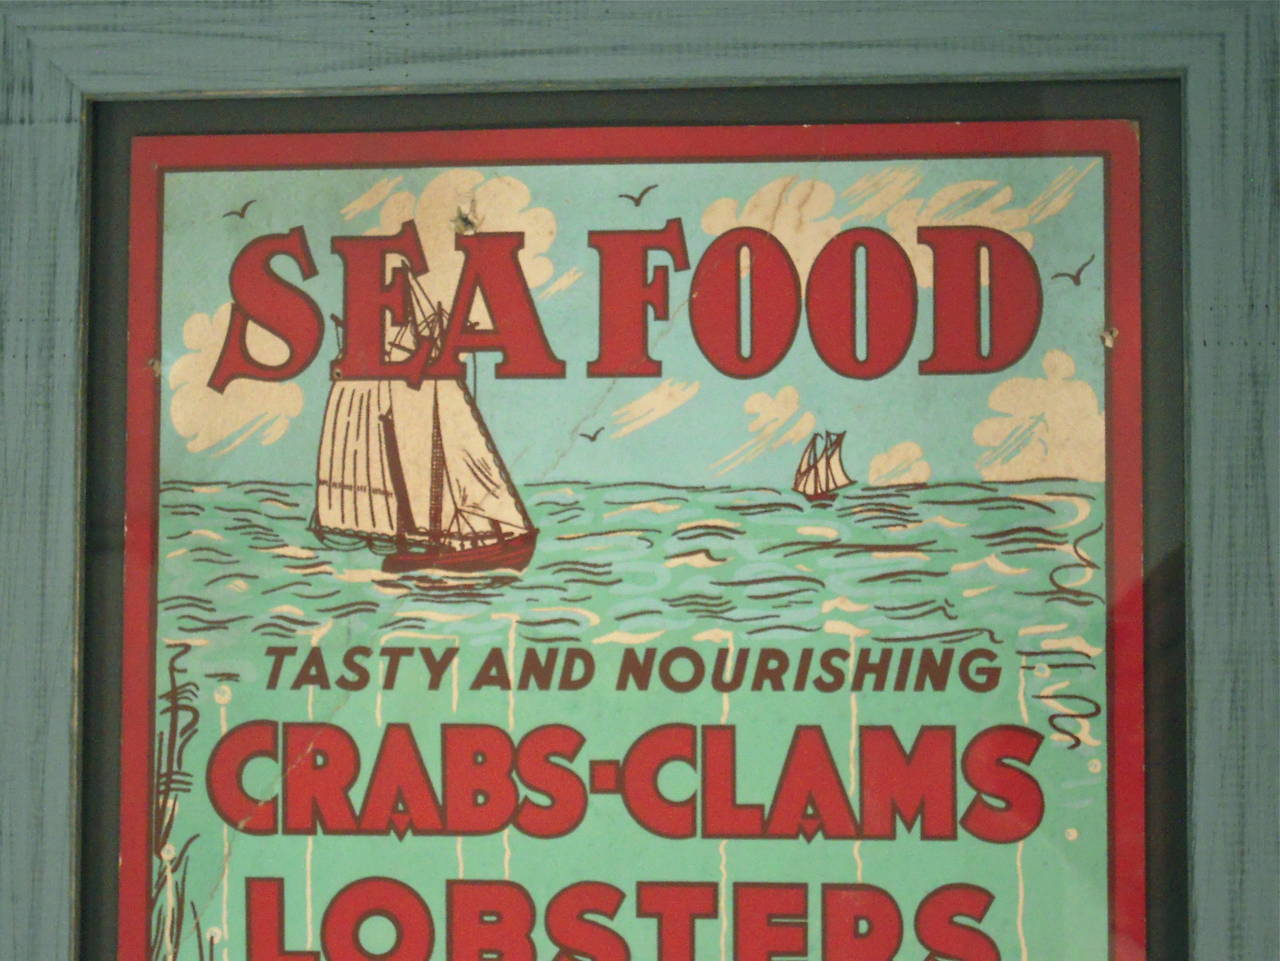 A graphic and entertaining seafood advertising poster, promoting its health benefits: 